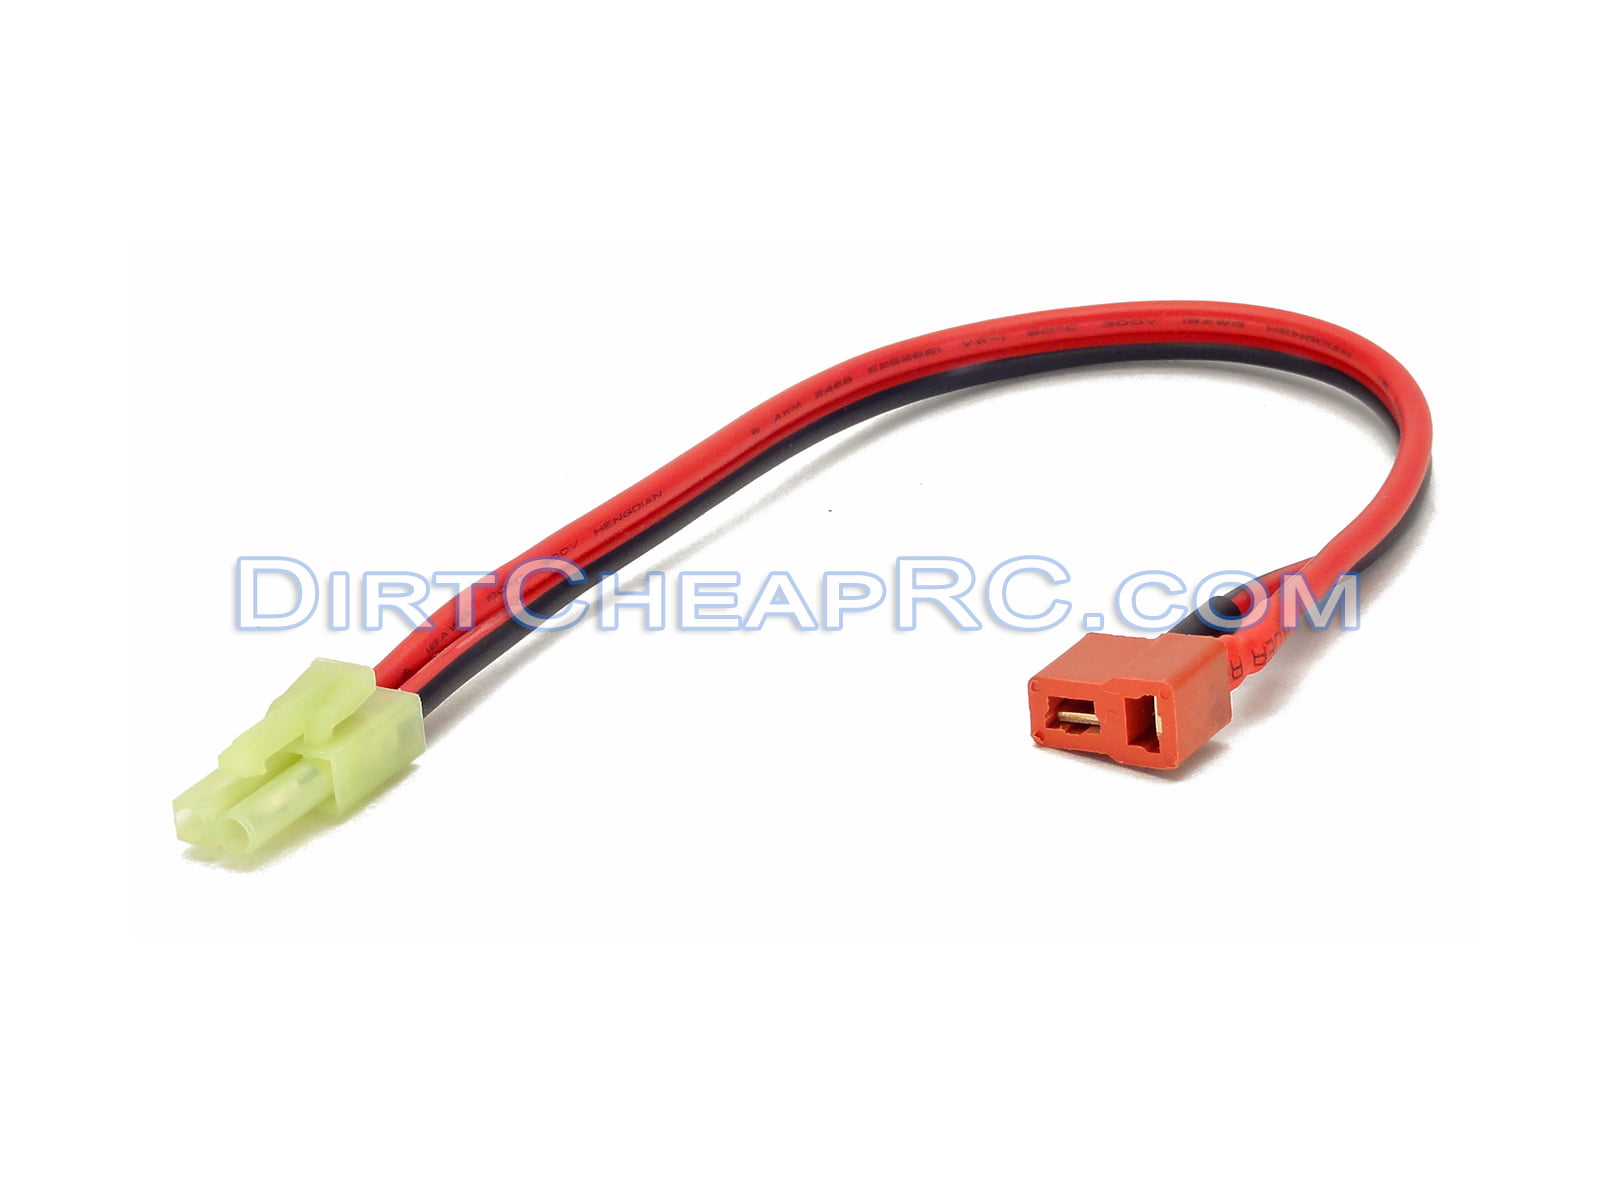 W-033 Adaptor Cable Connector Adapter Deans T-Plug Male Plug Himoto 1pz 